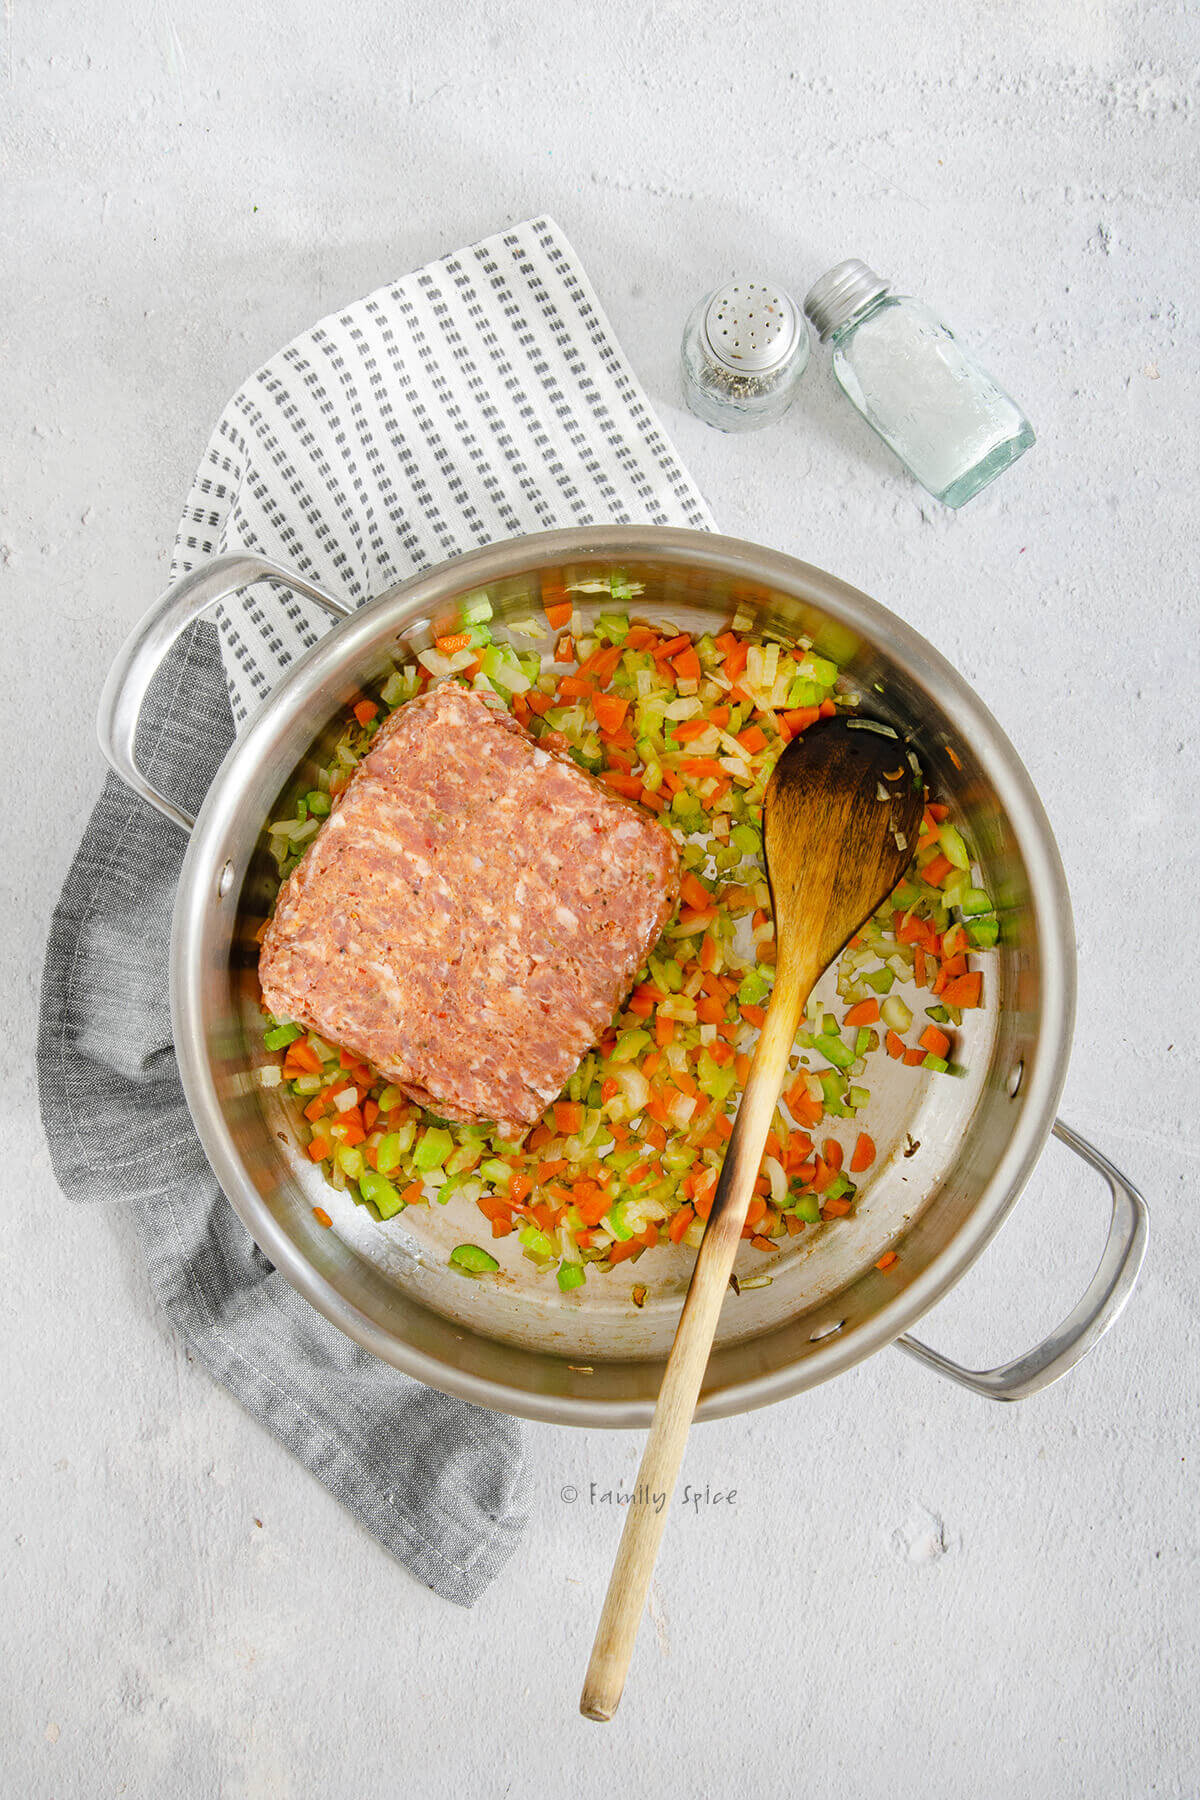 A brick of ground sausage added to vegetable mixture in a stainless pot